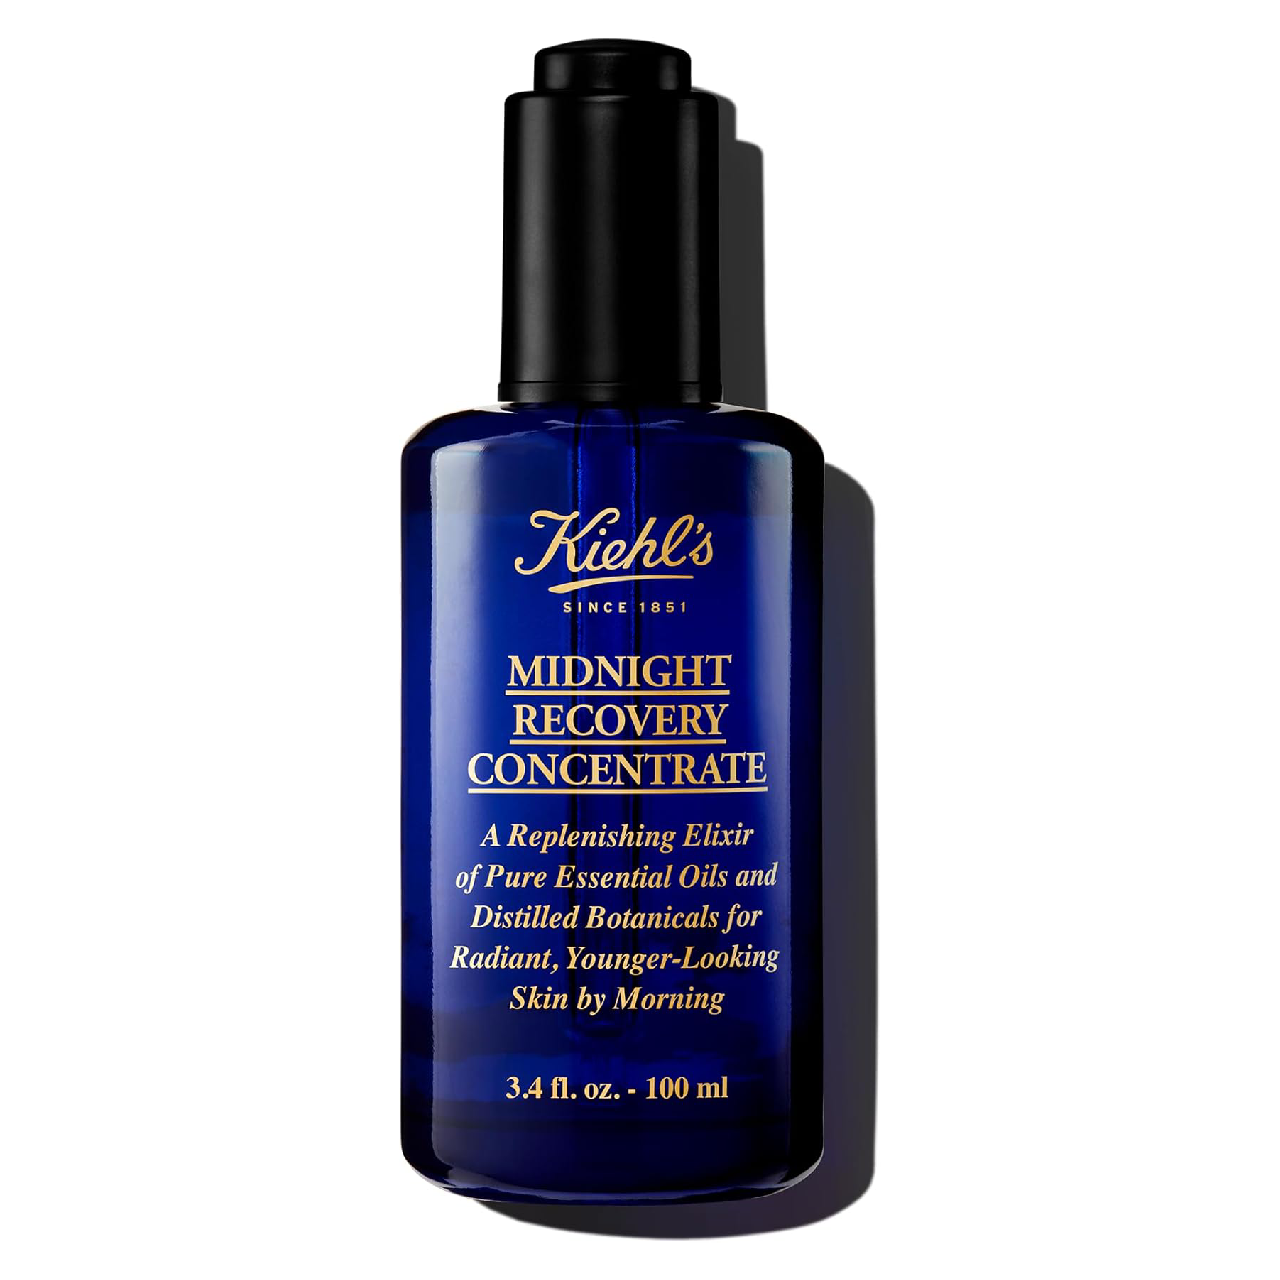 Bottle of Kiehl's Midnight Recovery Concentrate on a white background